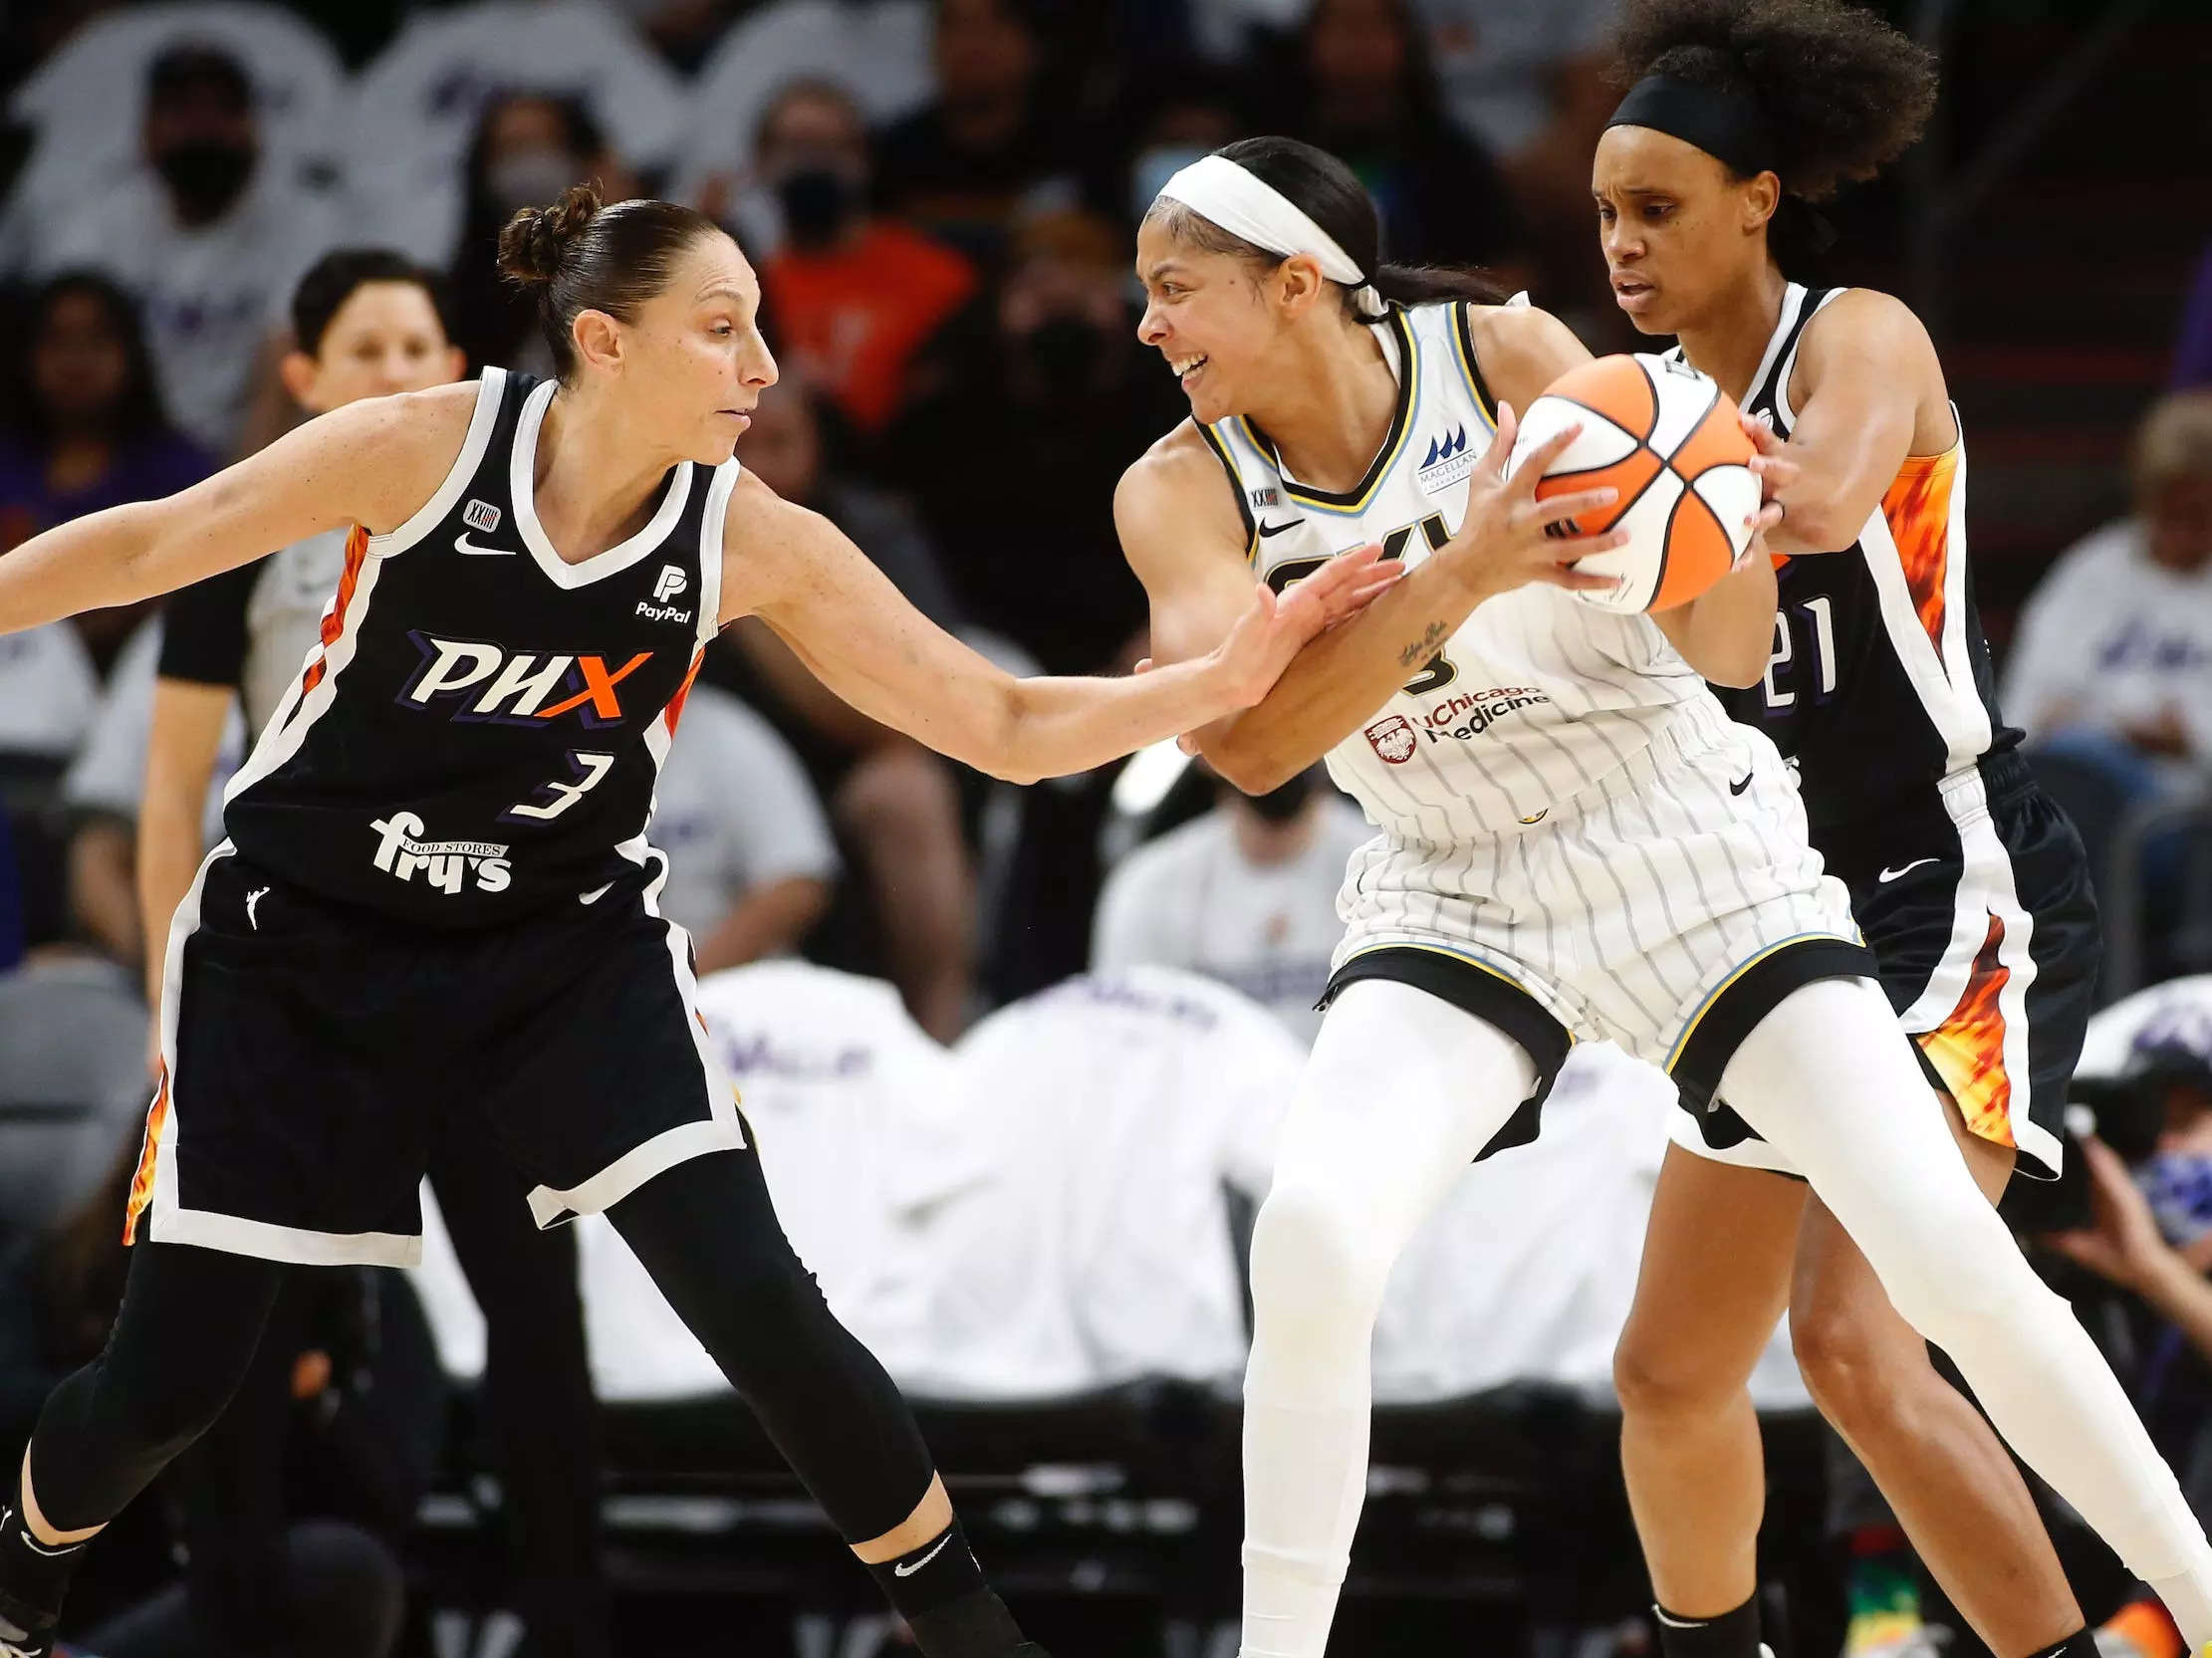 Diana Taurasi (left) defends Candace Parker of the Chicago Sky.